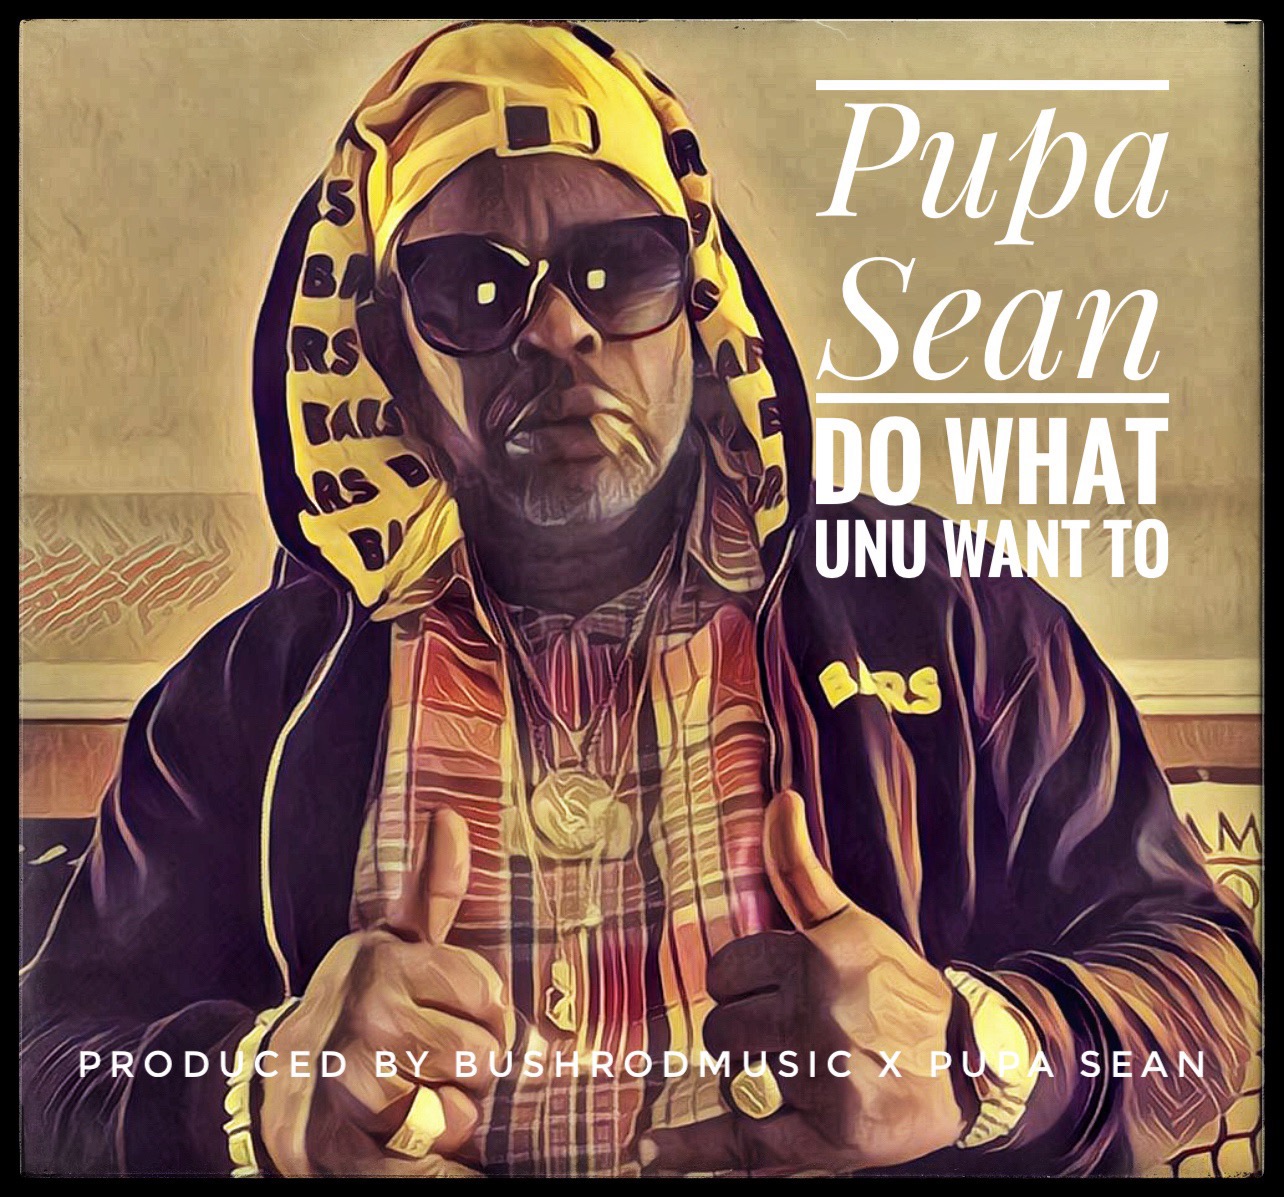 Art for Do What Unu Want To by Pupa Sean